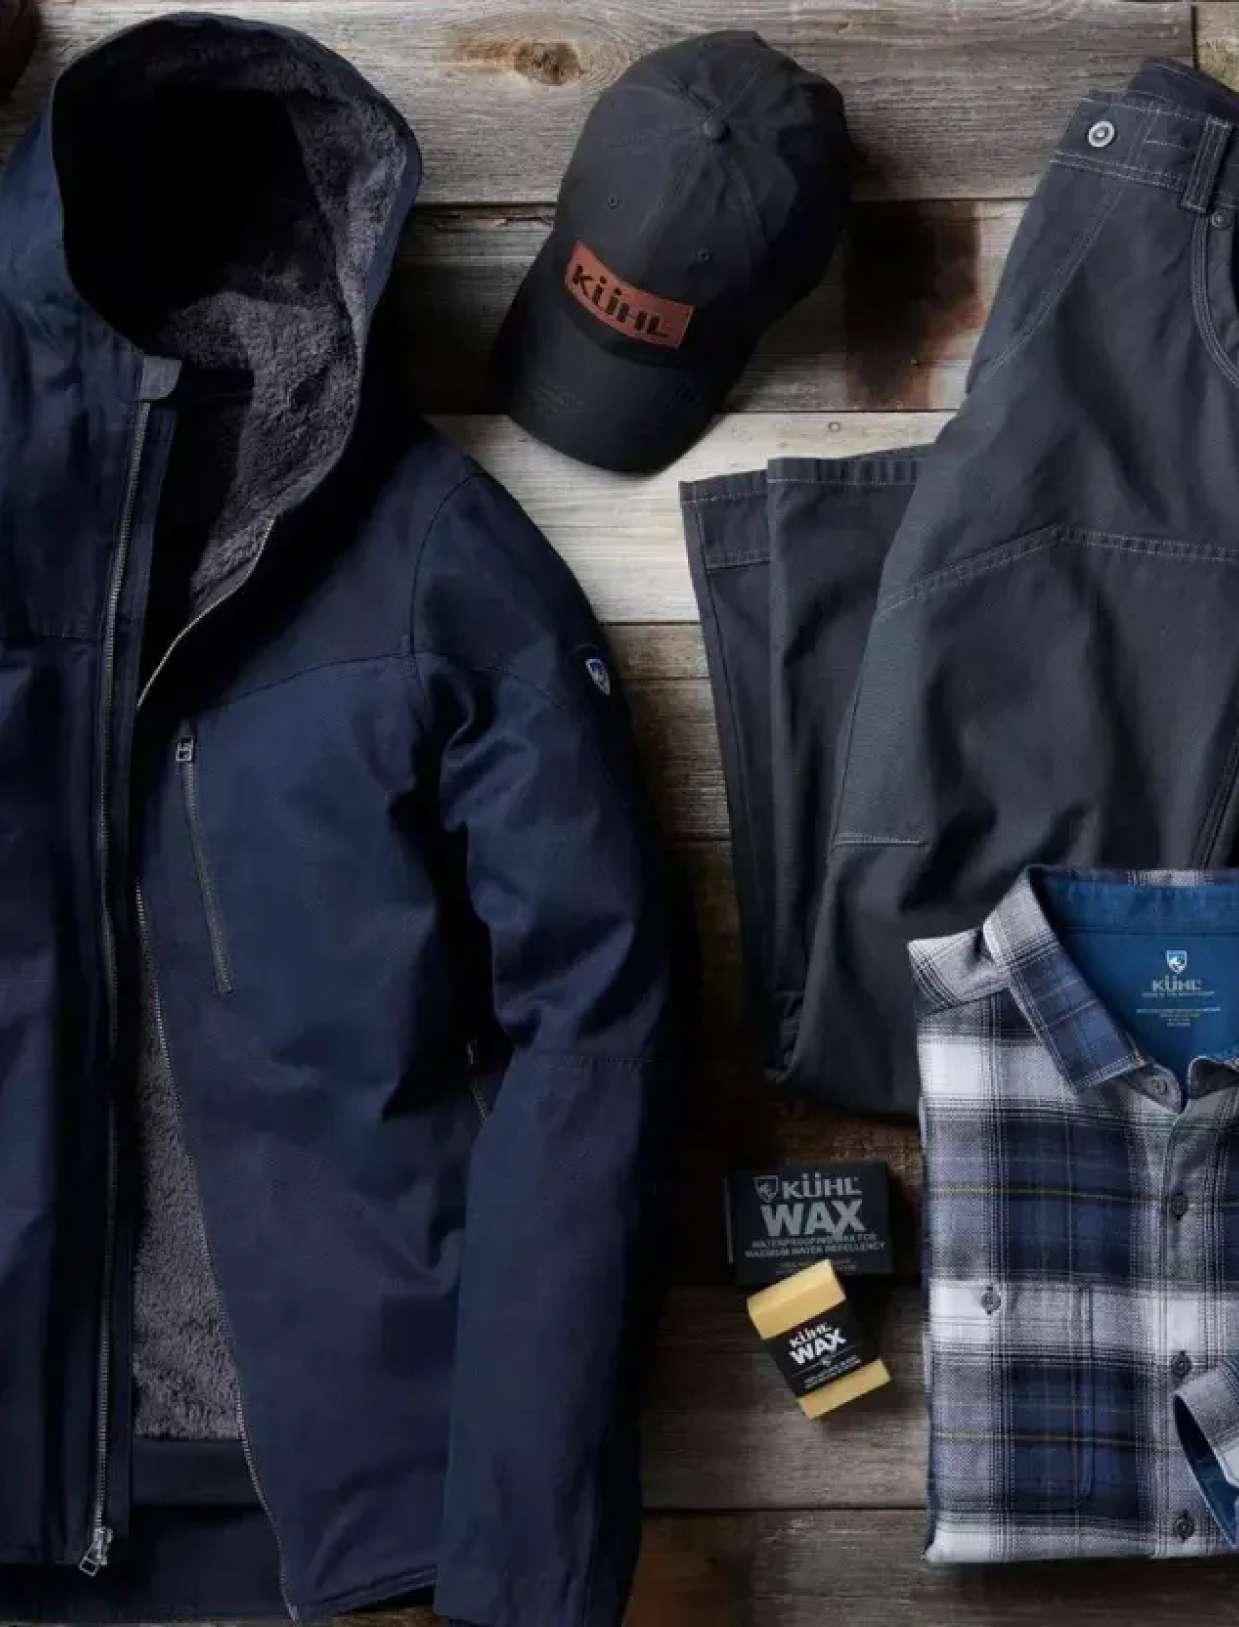 The Law™ Flannel and other durable Kühl clothes.